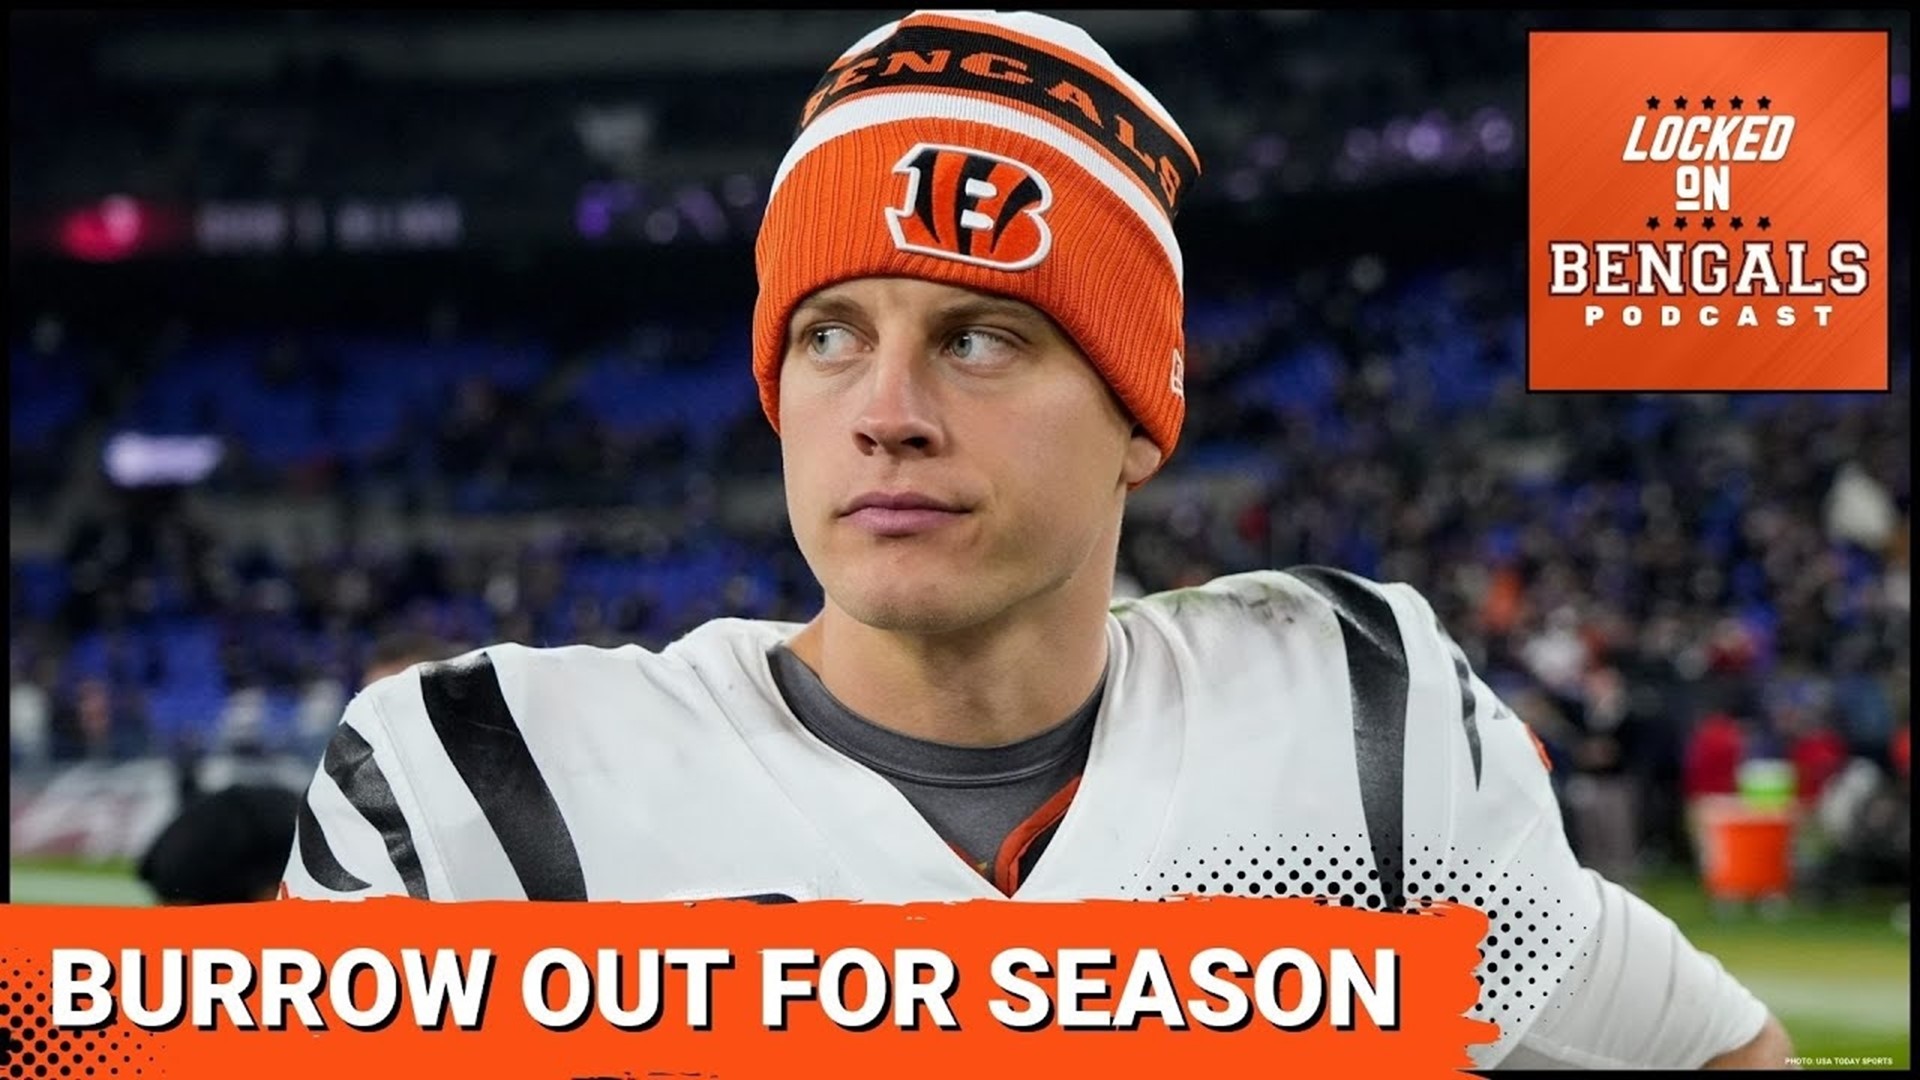 Cincinnati Bengals quarterback Joe Burrow is out for the season after suffering a wrist injury against the Baltimore Ravens.